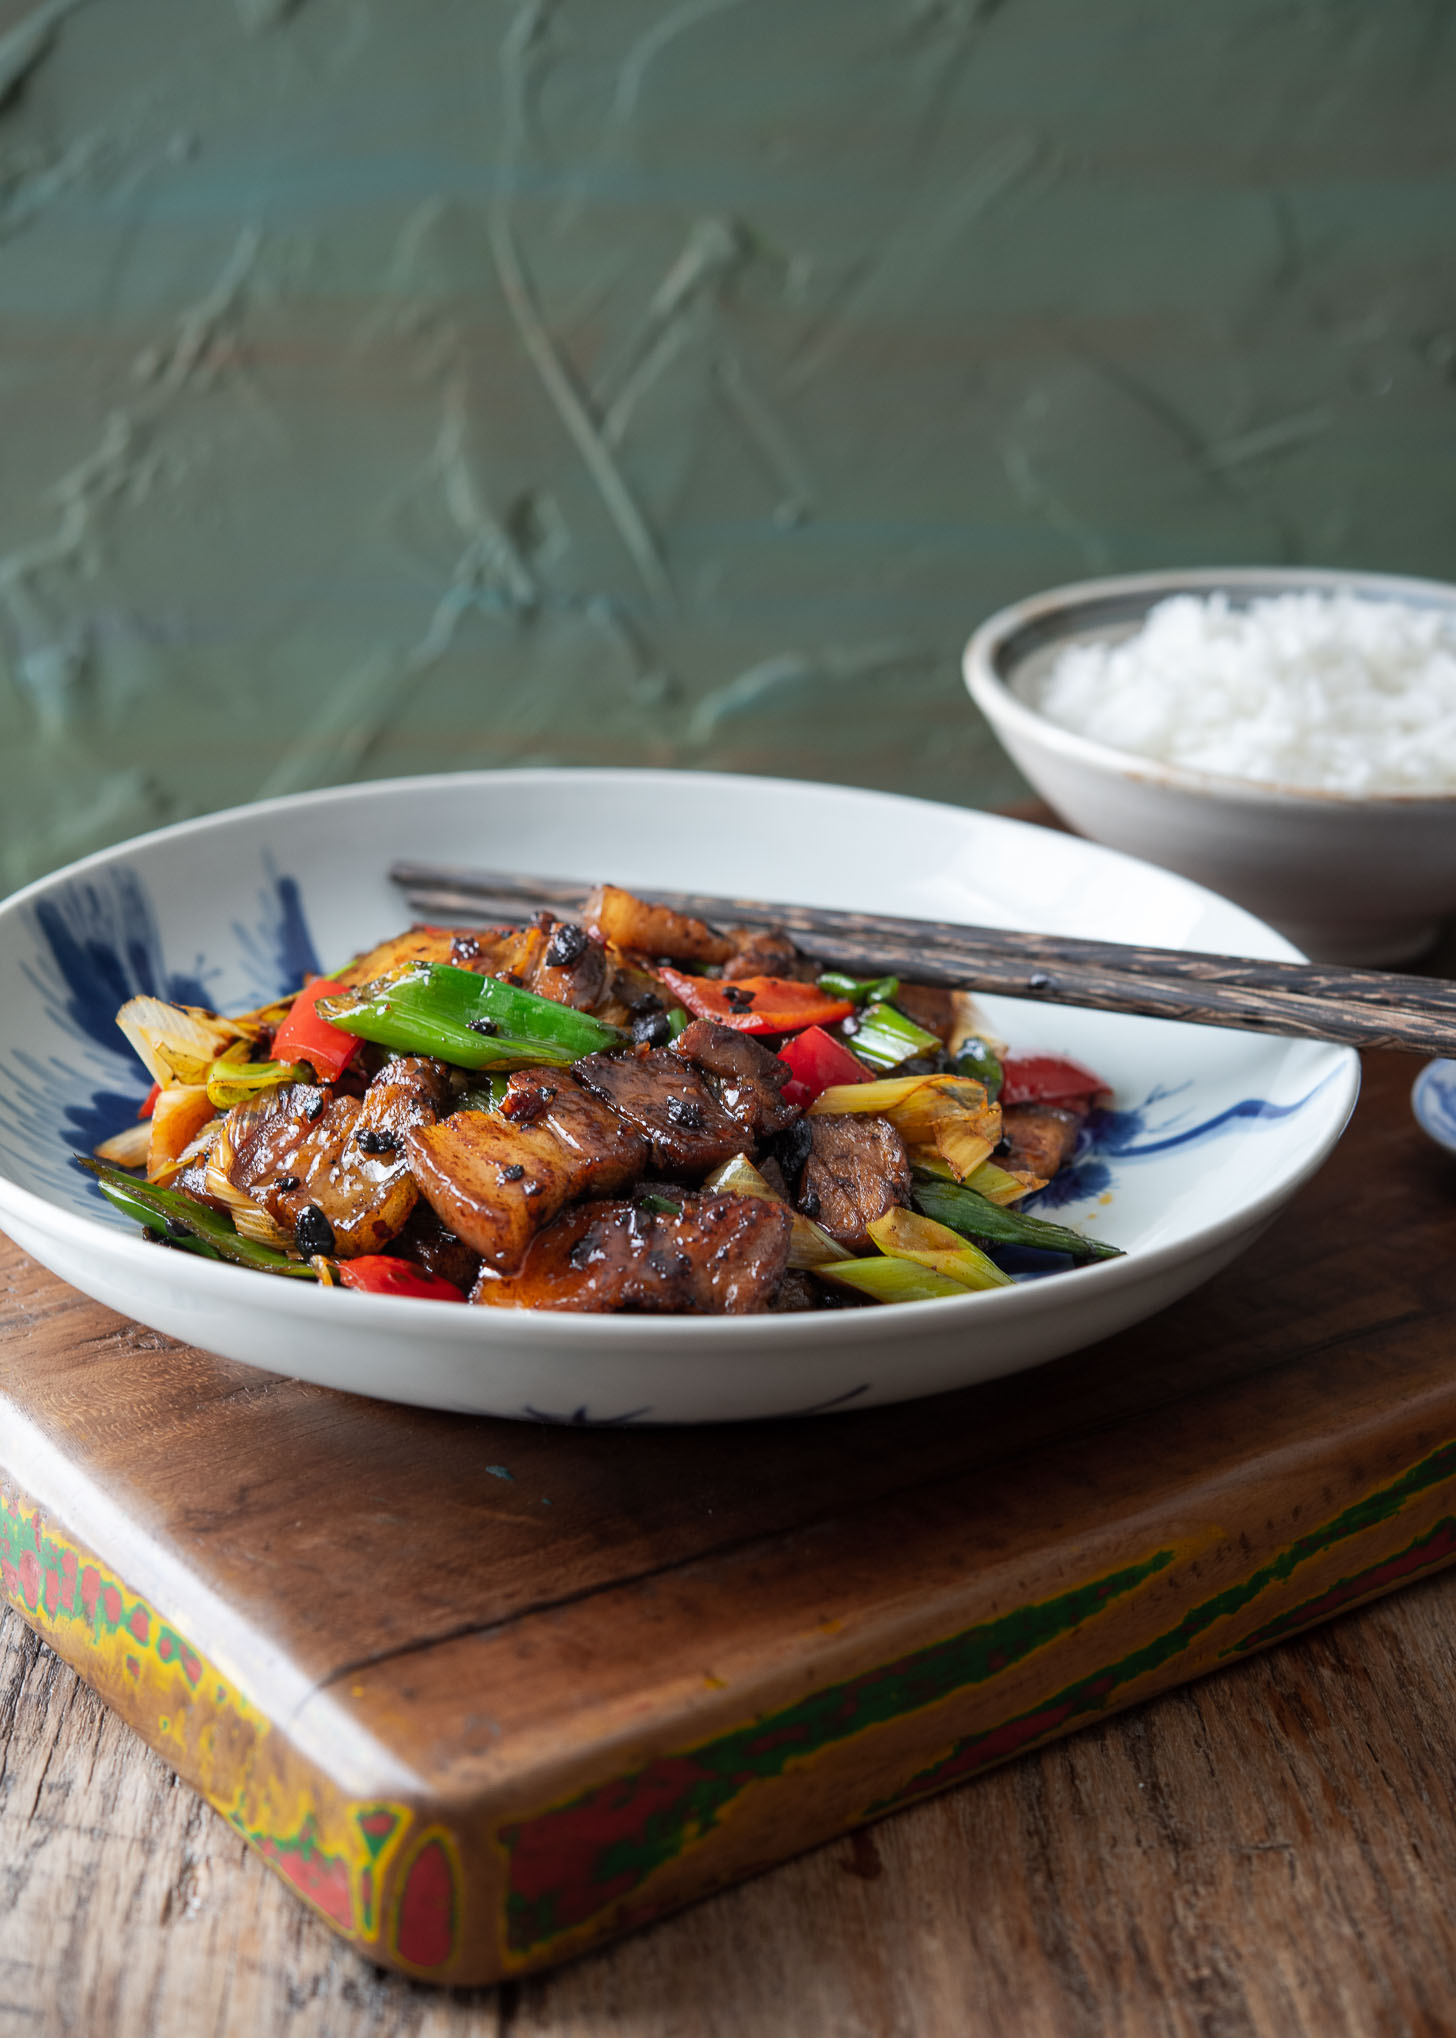 Chinese twice cooked pork, Sichuan pork stir-fry) presented with a bowl of rice.